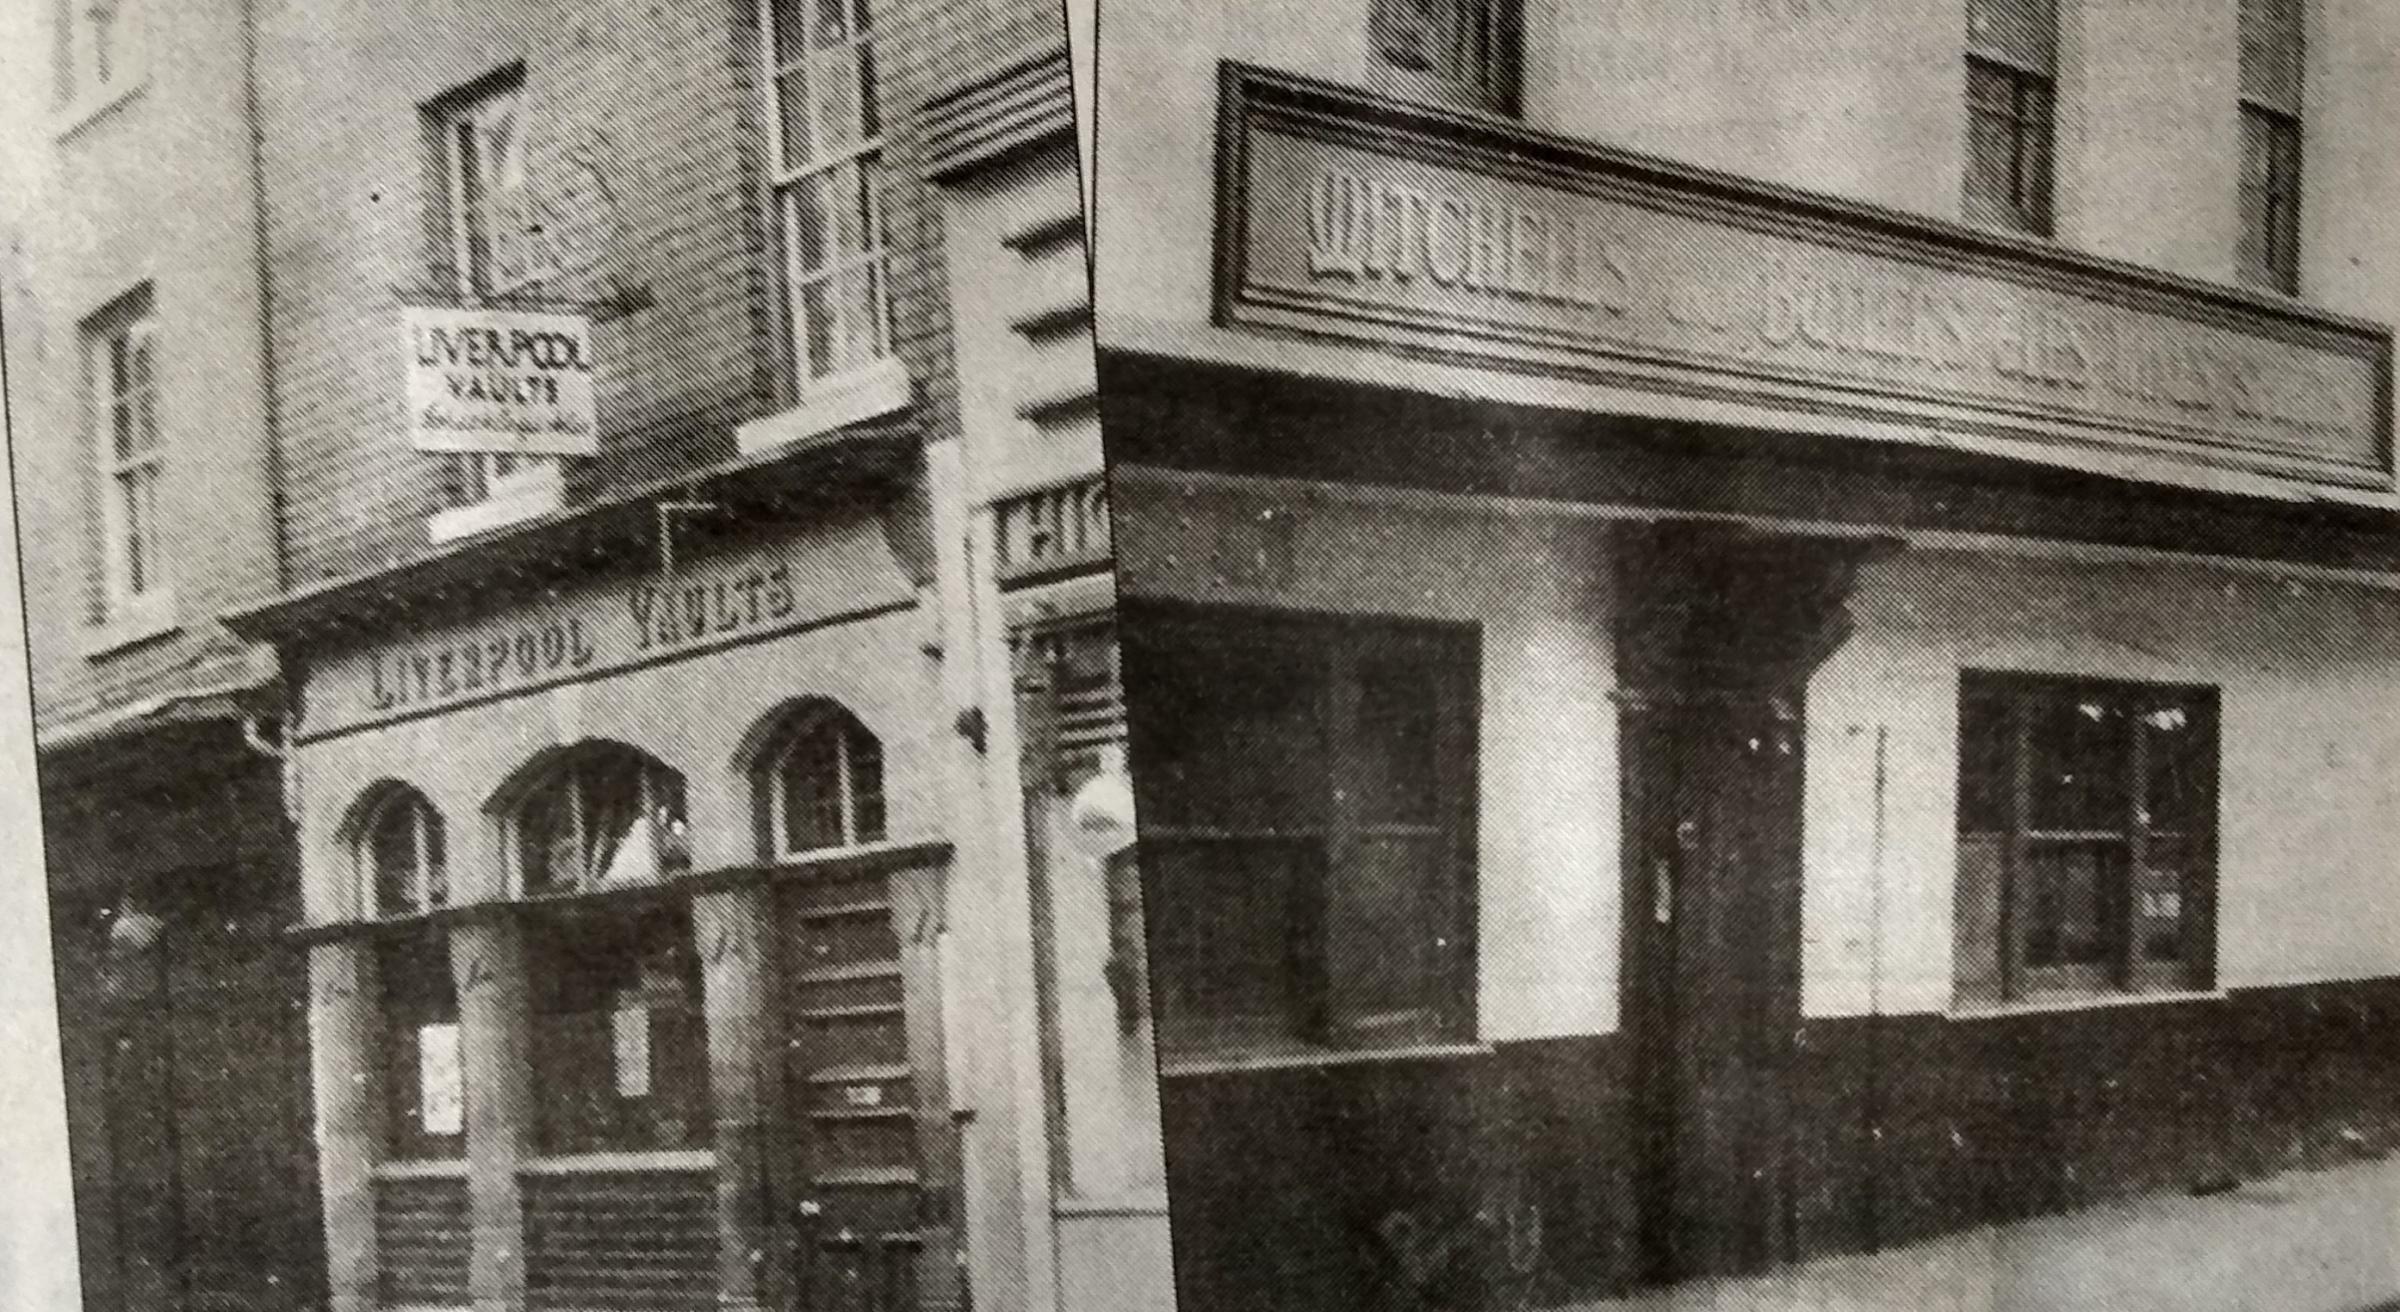 Stan Pratley, of the renowned family china emporium in The Shambles, lent the paper these two images of long-lost pubs. The Liverpool Vaults stood opposite the rear of the former Woolworths store, while The Butchers Arms occupied the site of what is